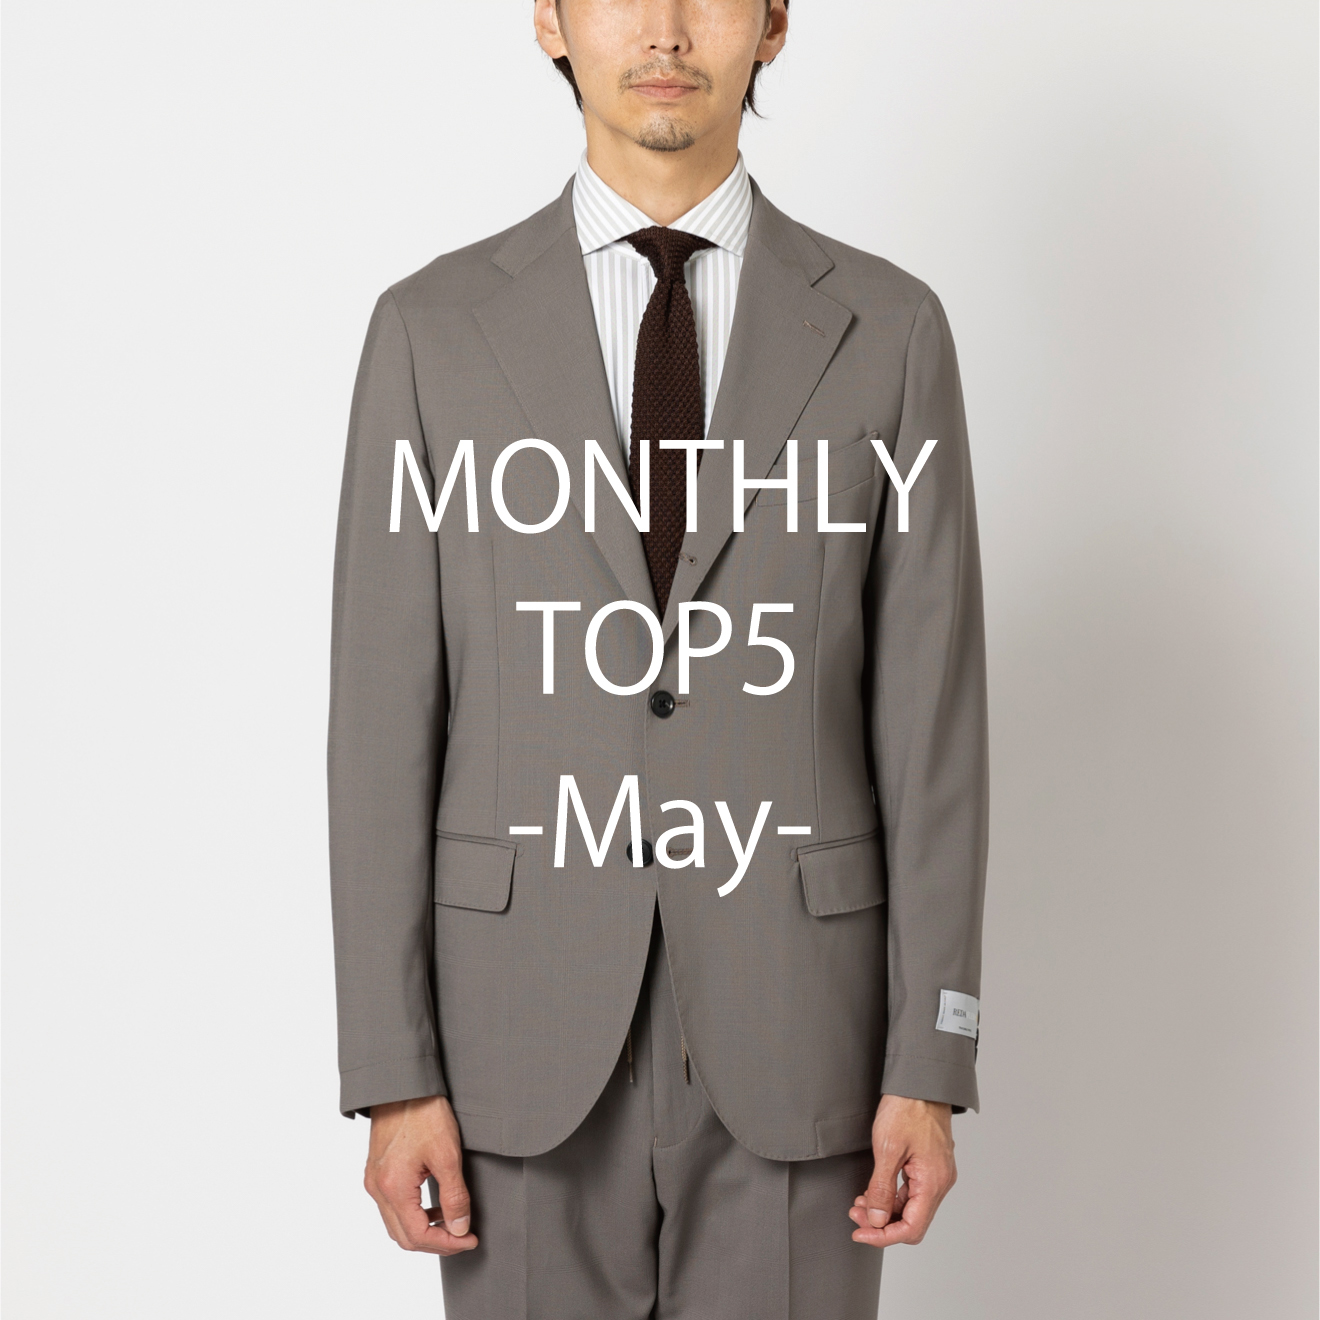 MONTHLY TOP 5 -May-